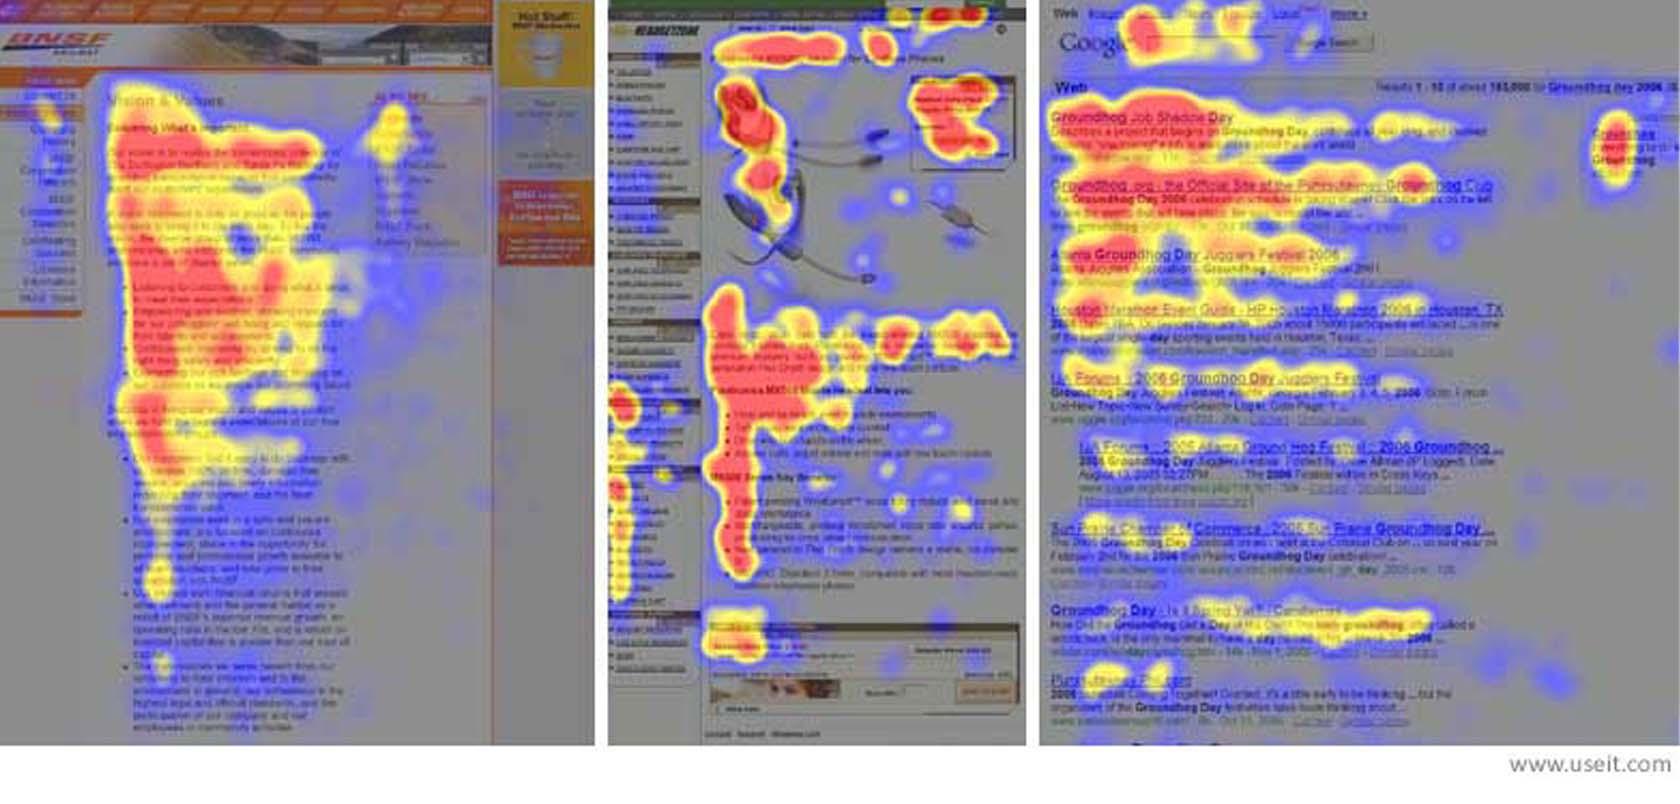 Examples of webpages with heatmap overlays